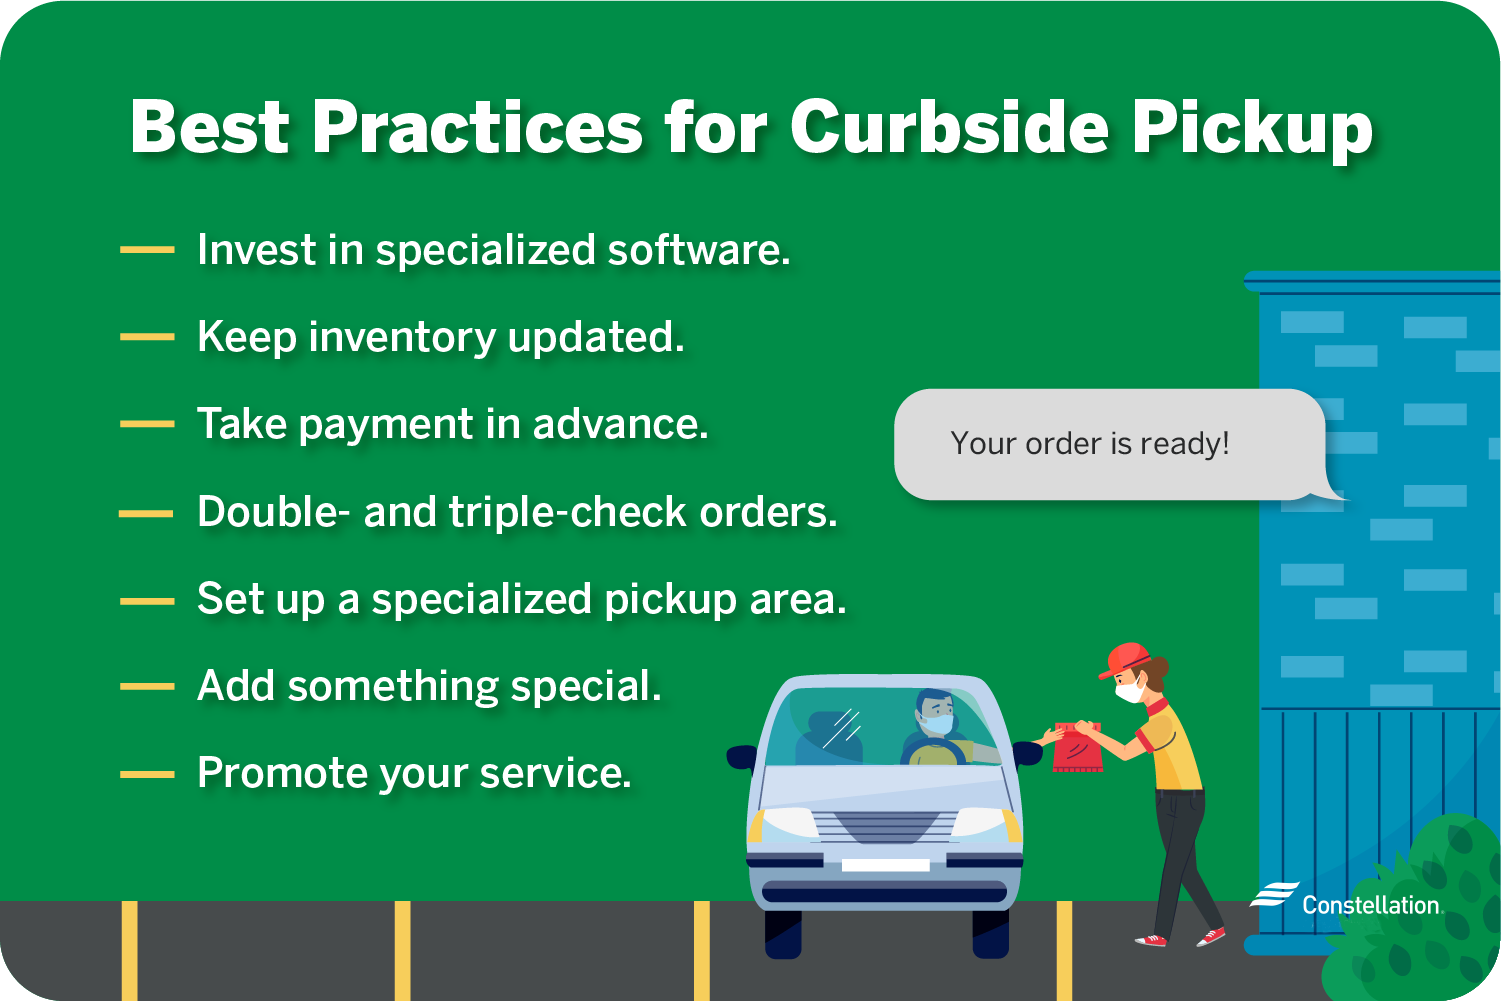 Best practices for curbside pickup